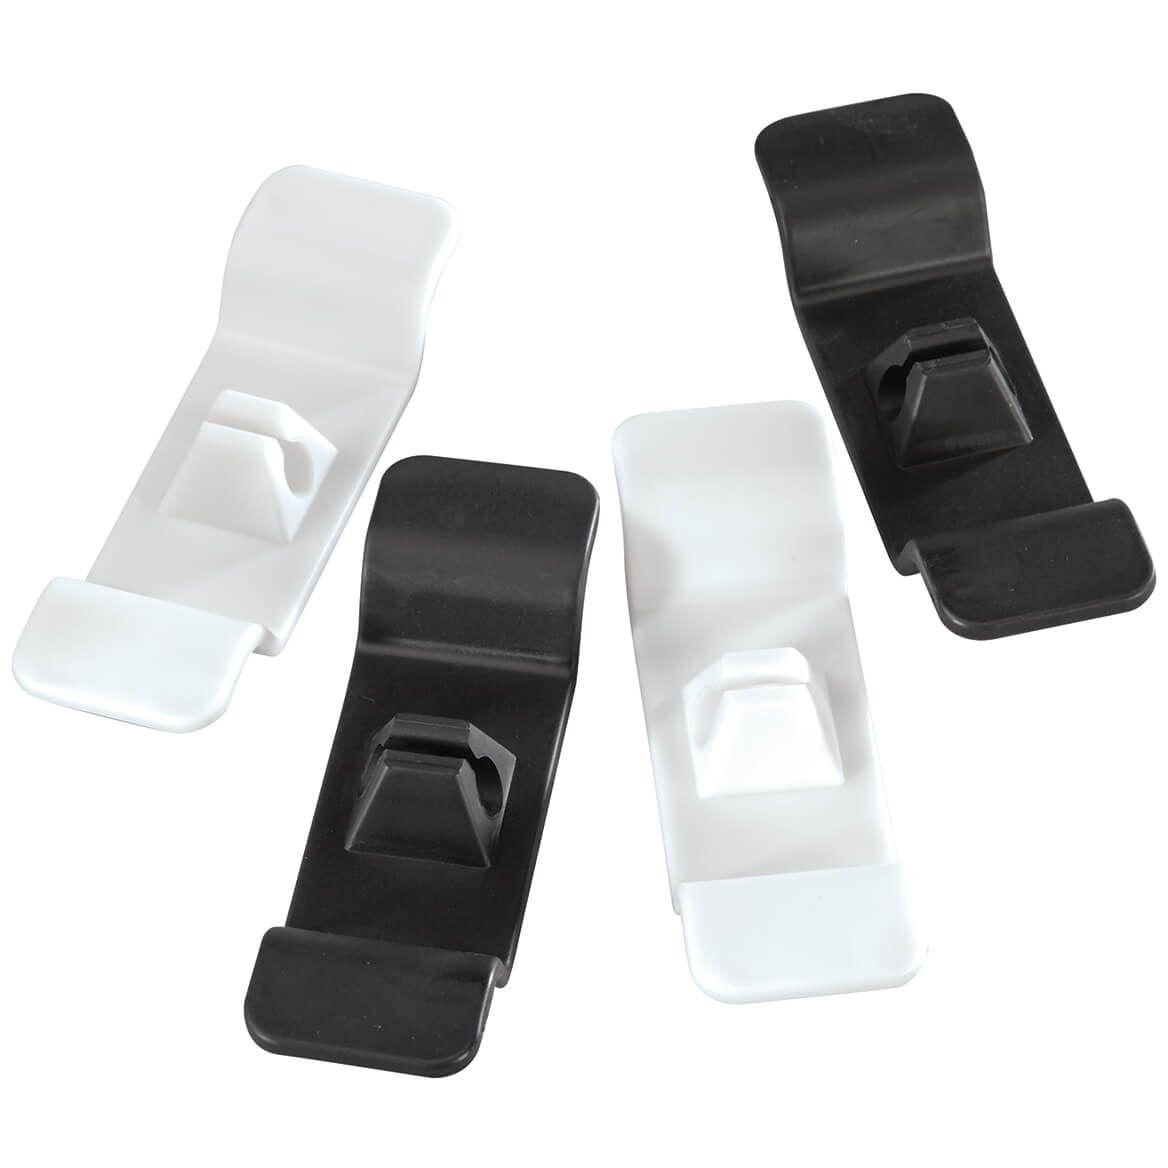 Appliance Cord Winders by Chef's Pride, Set of 4 + '-' + 374491